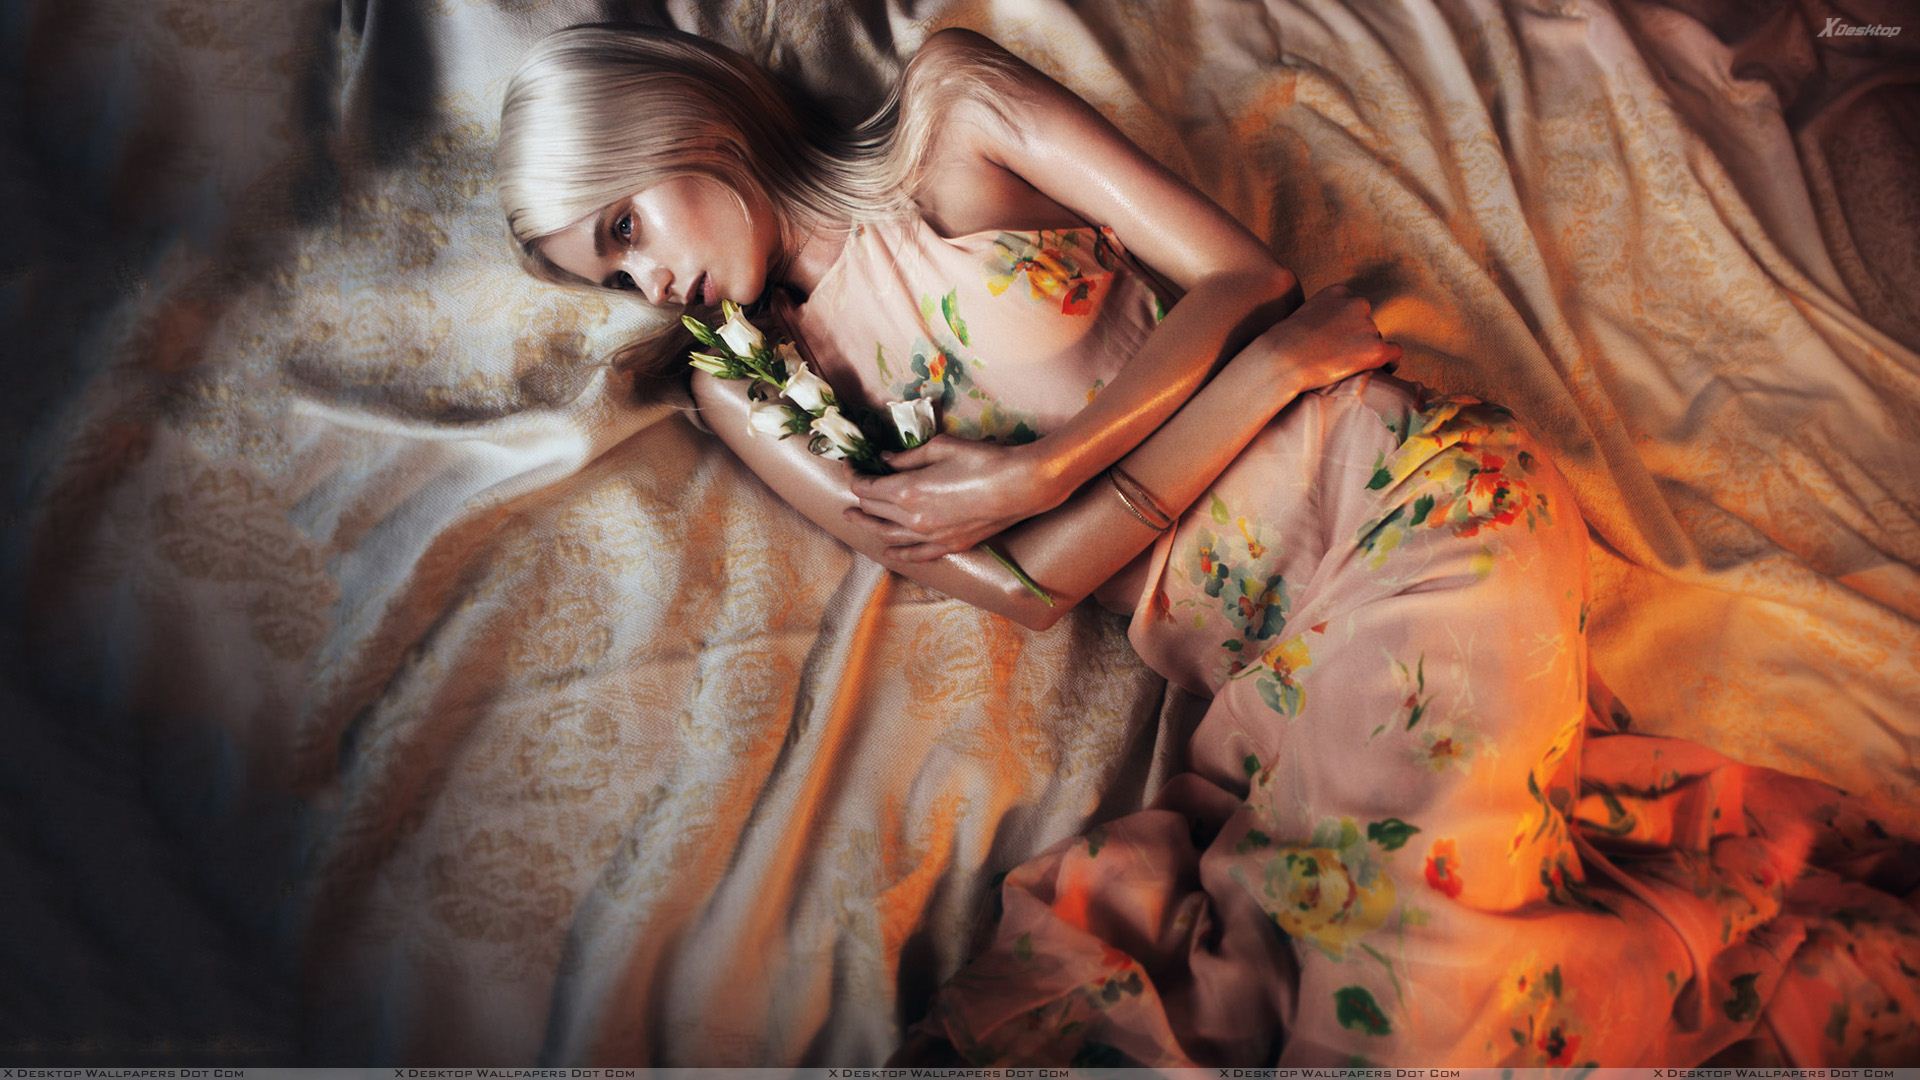 Abbey Lee Kershaw Laying On Bed In Colorful Dress Wallpaper